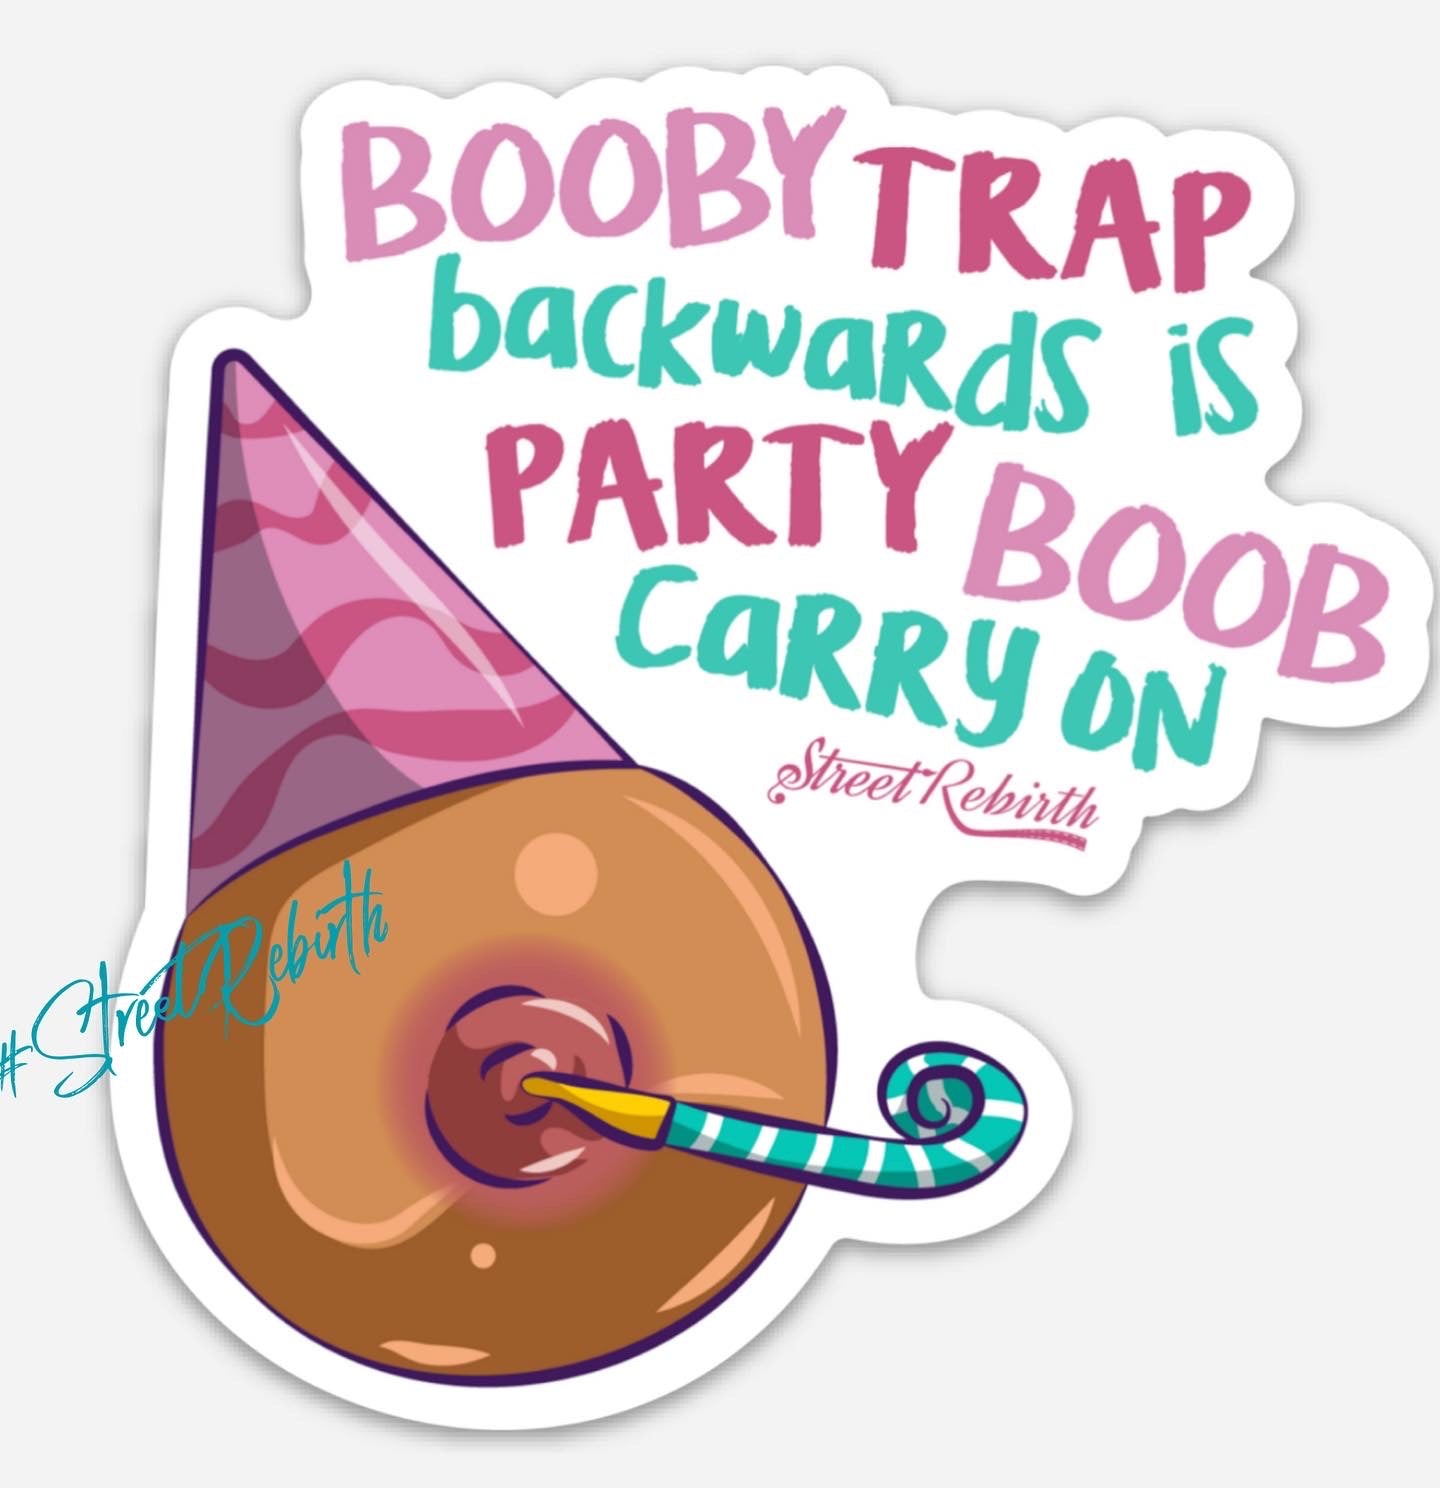 Booby Trap Party Boob Sticker – One 4 Inch Water Proof Vinyl Sticker – For Hydro Flask, Skateboard, Laptop, Planner, Car, Collecting, Gifting